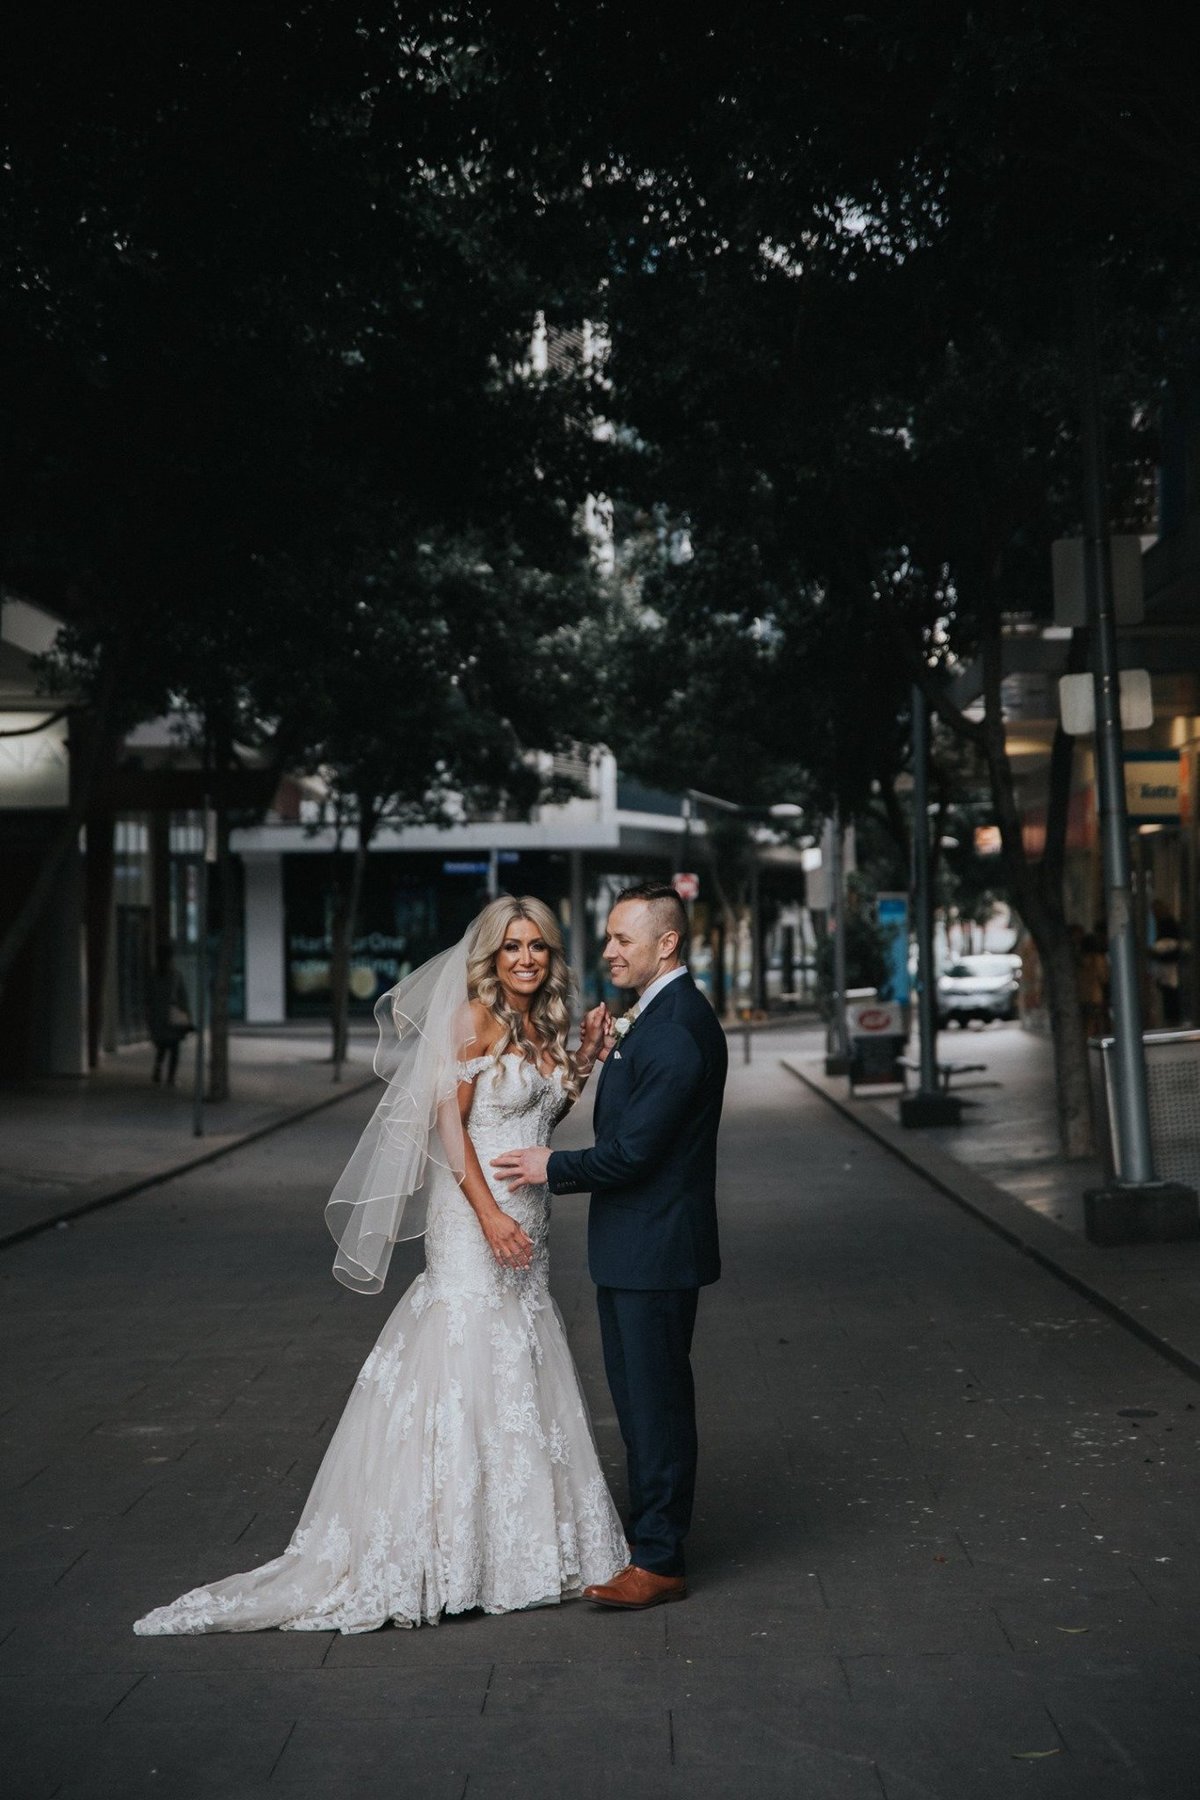 All Smiles Docklands Bridal Portraits Wedding Photography. Sapphire and Stone Photographer